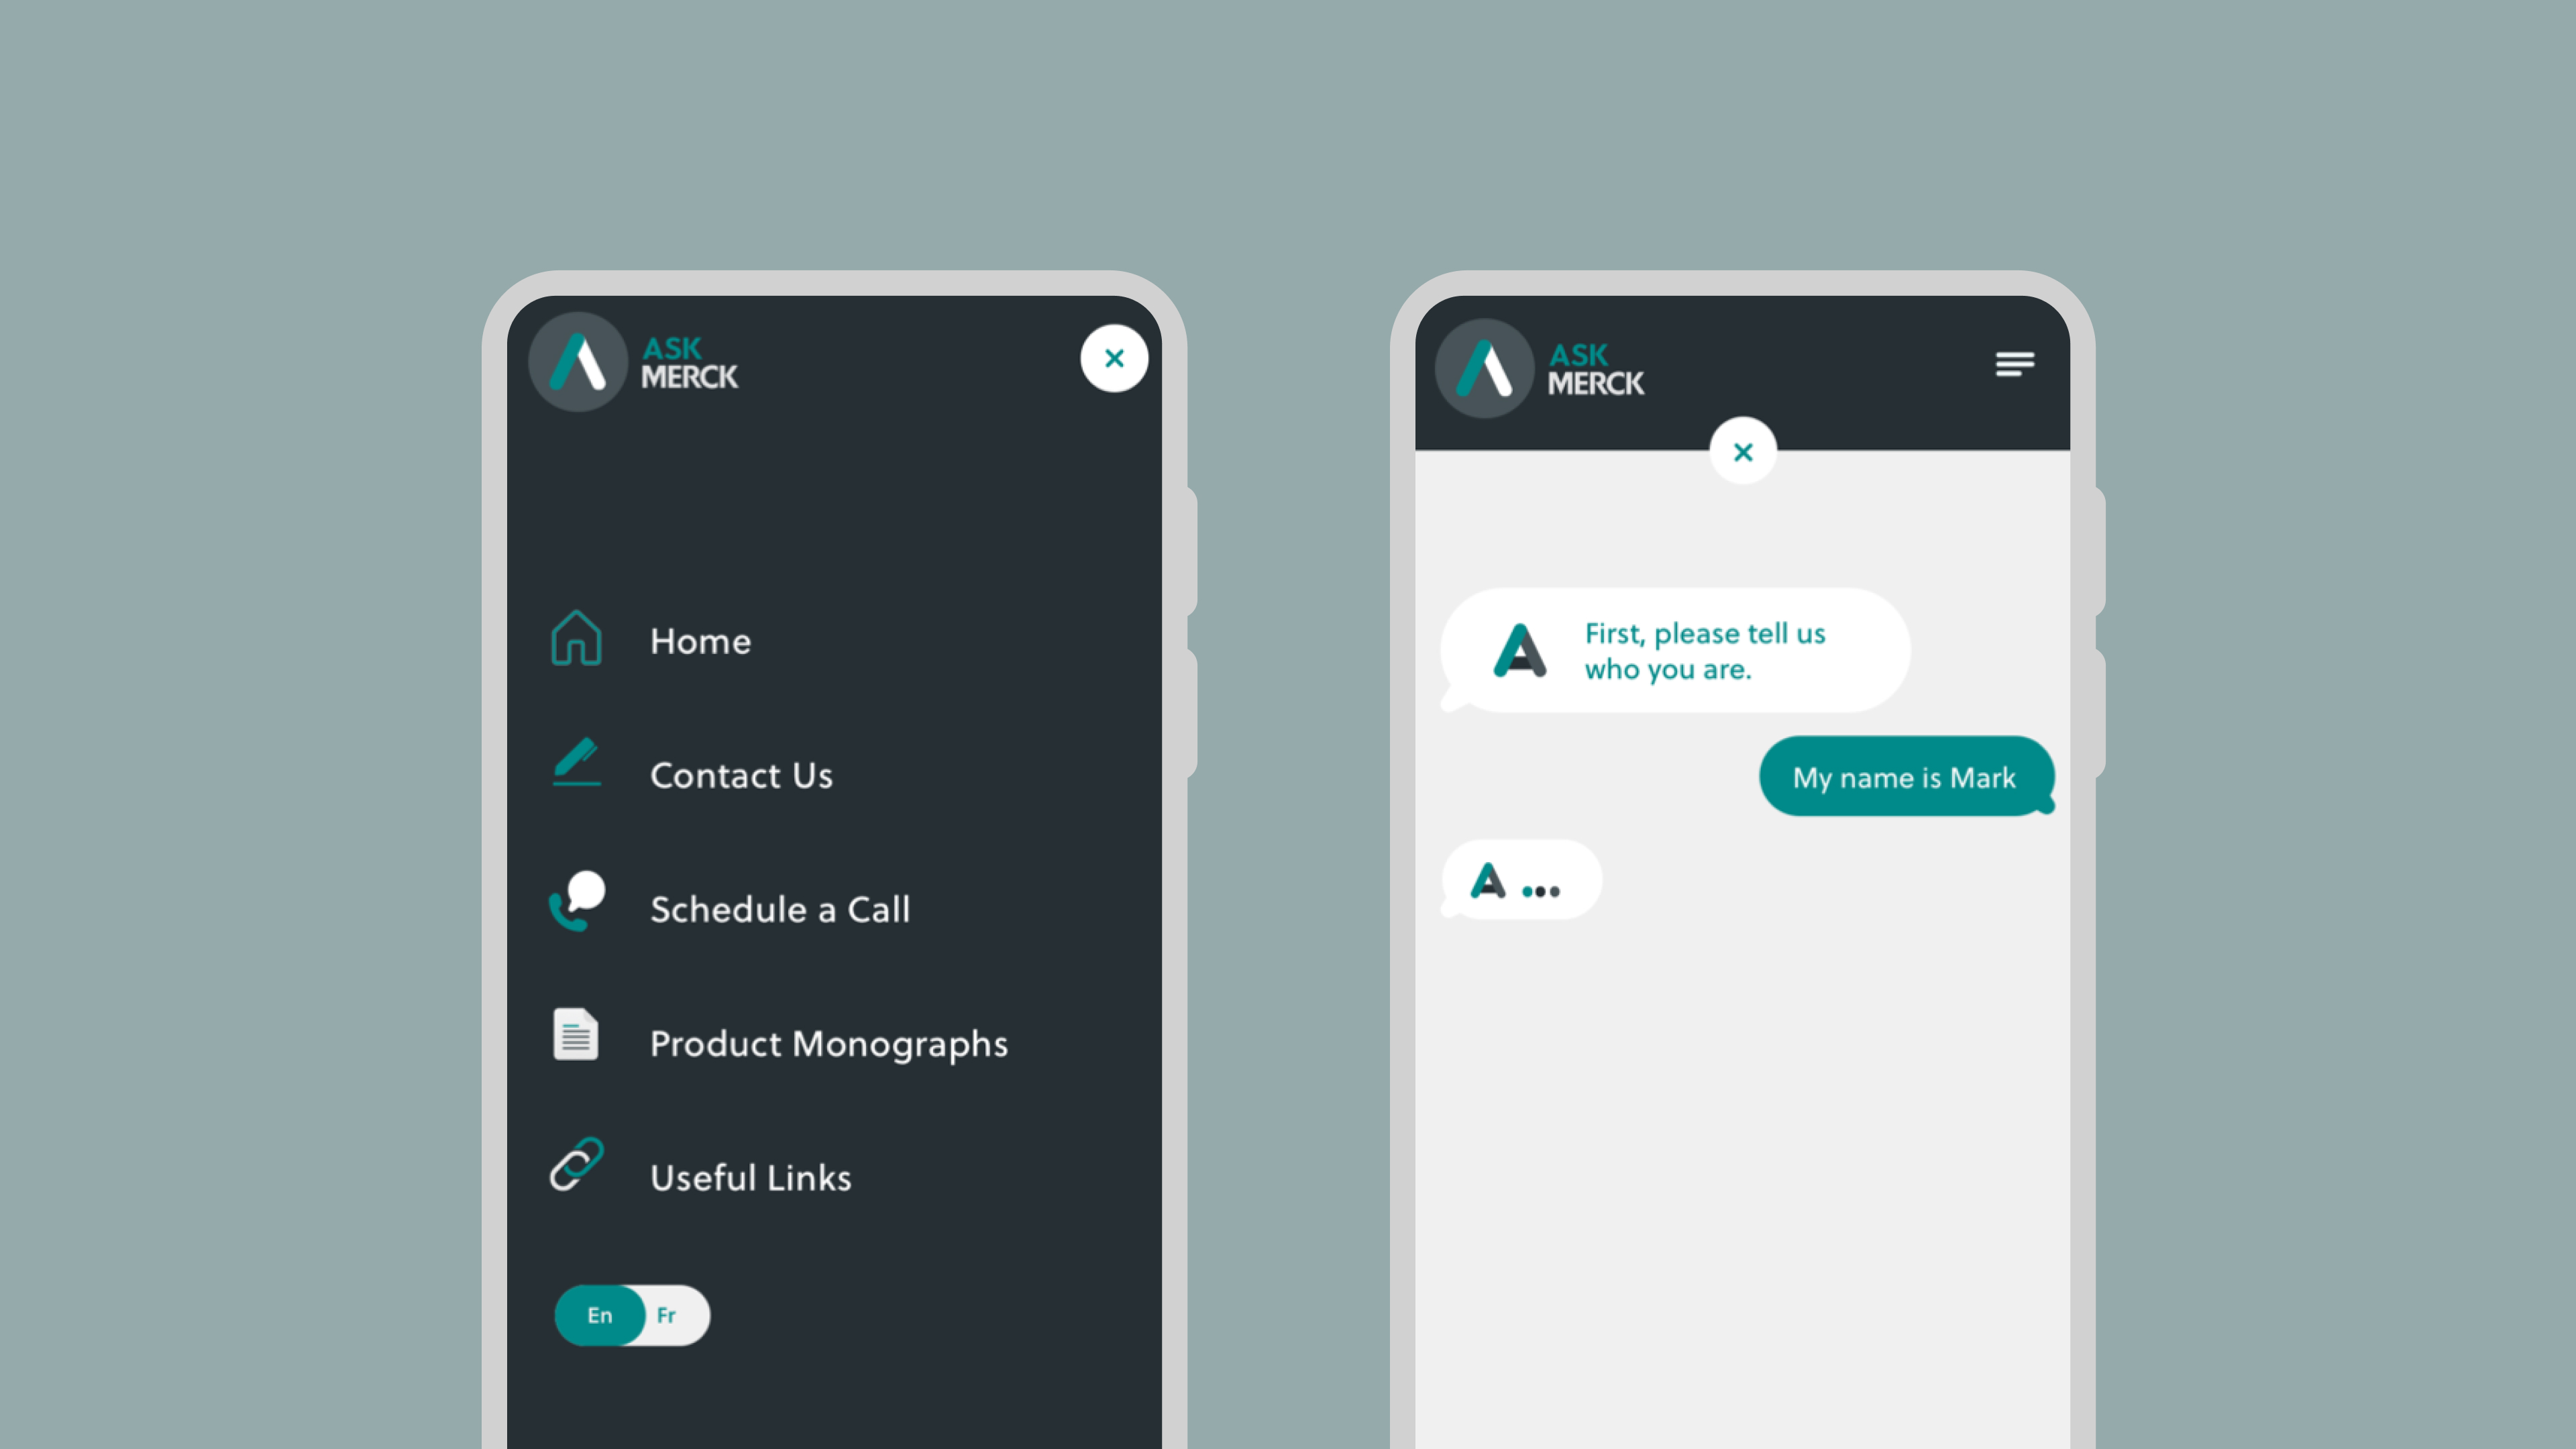 Two mobile devices showing the Ask Merck navigation menu (left) and the AI chat interface (right).